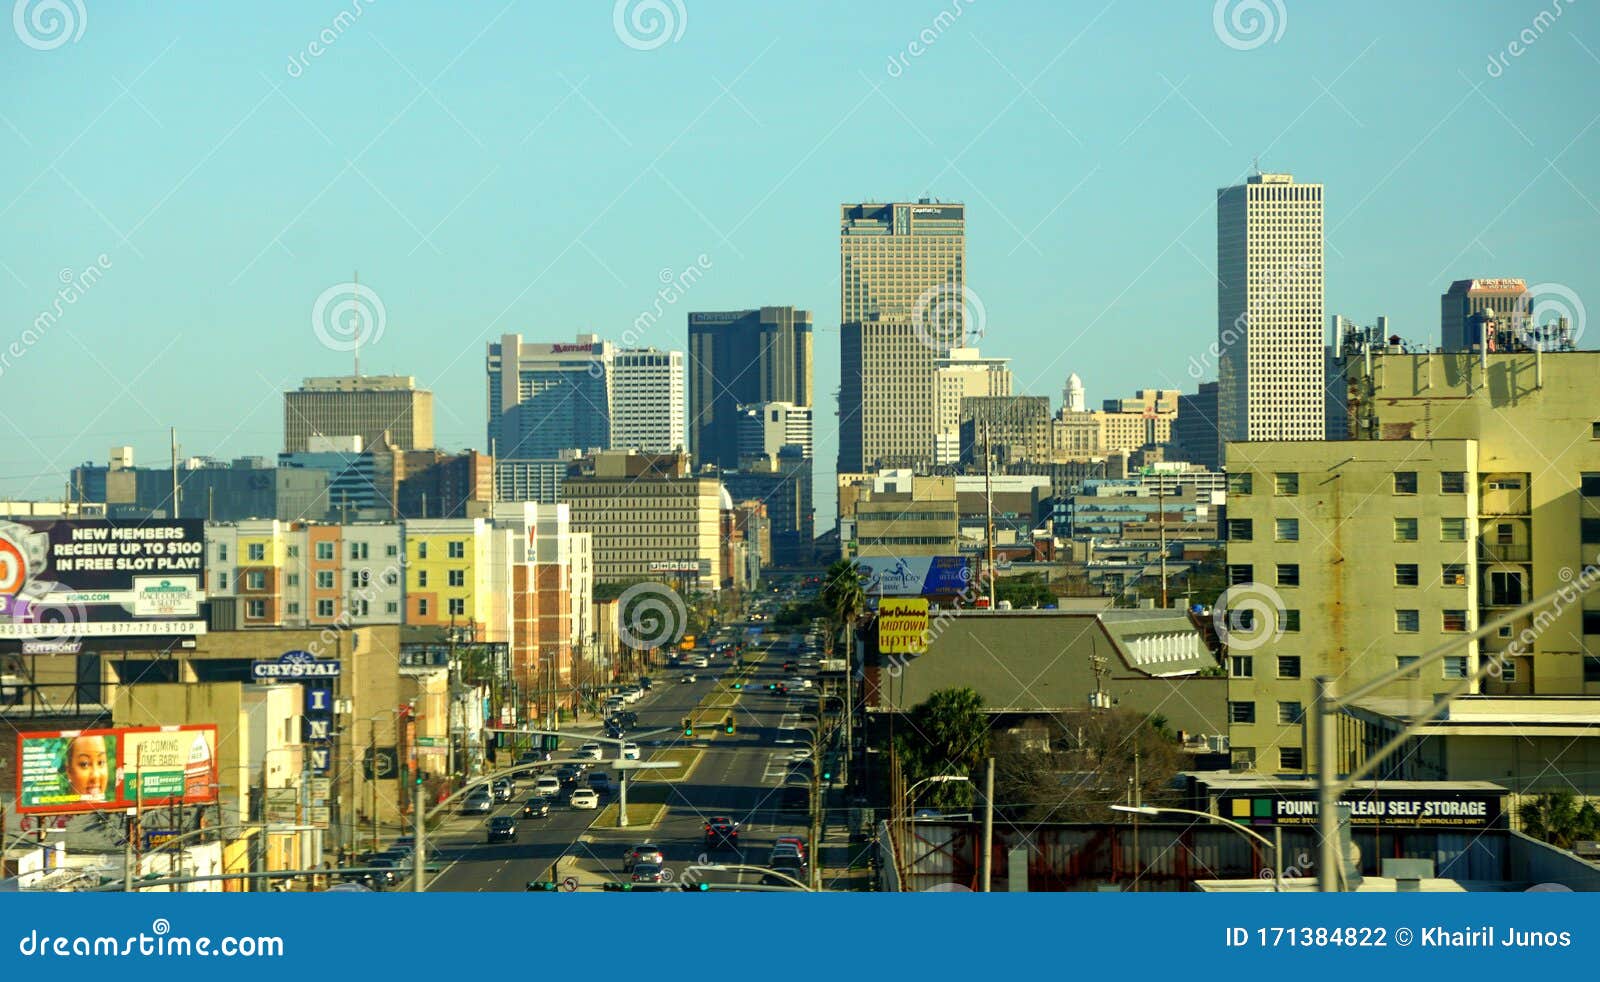 New Orleans, Louisiana, U.S.A - February 2, 2020 - The Aerial View Of The Traffic And Buildings ...